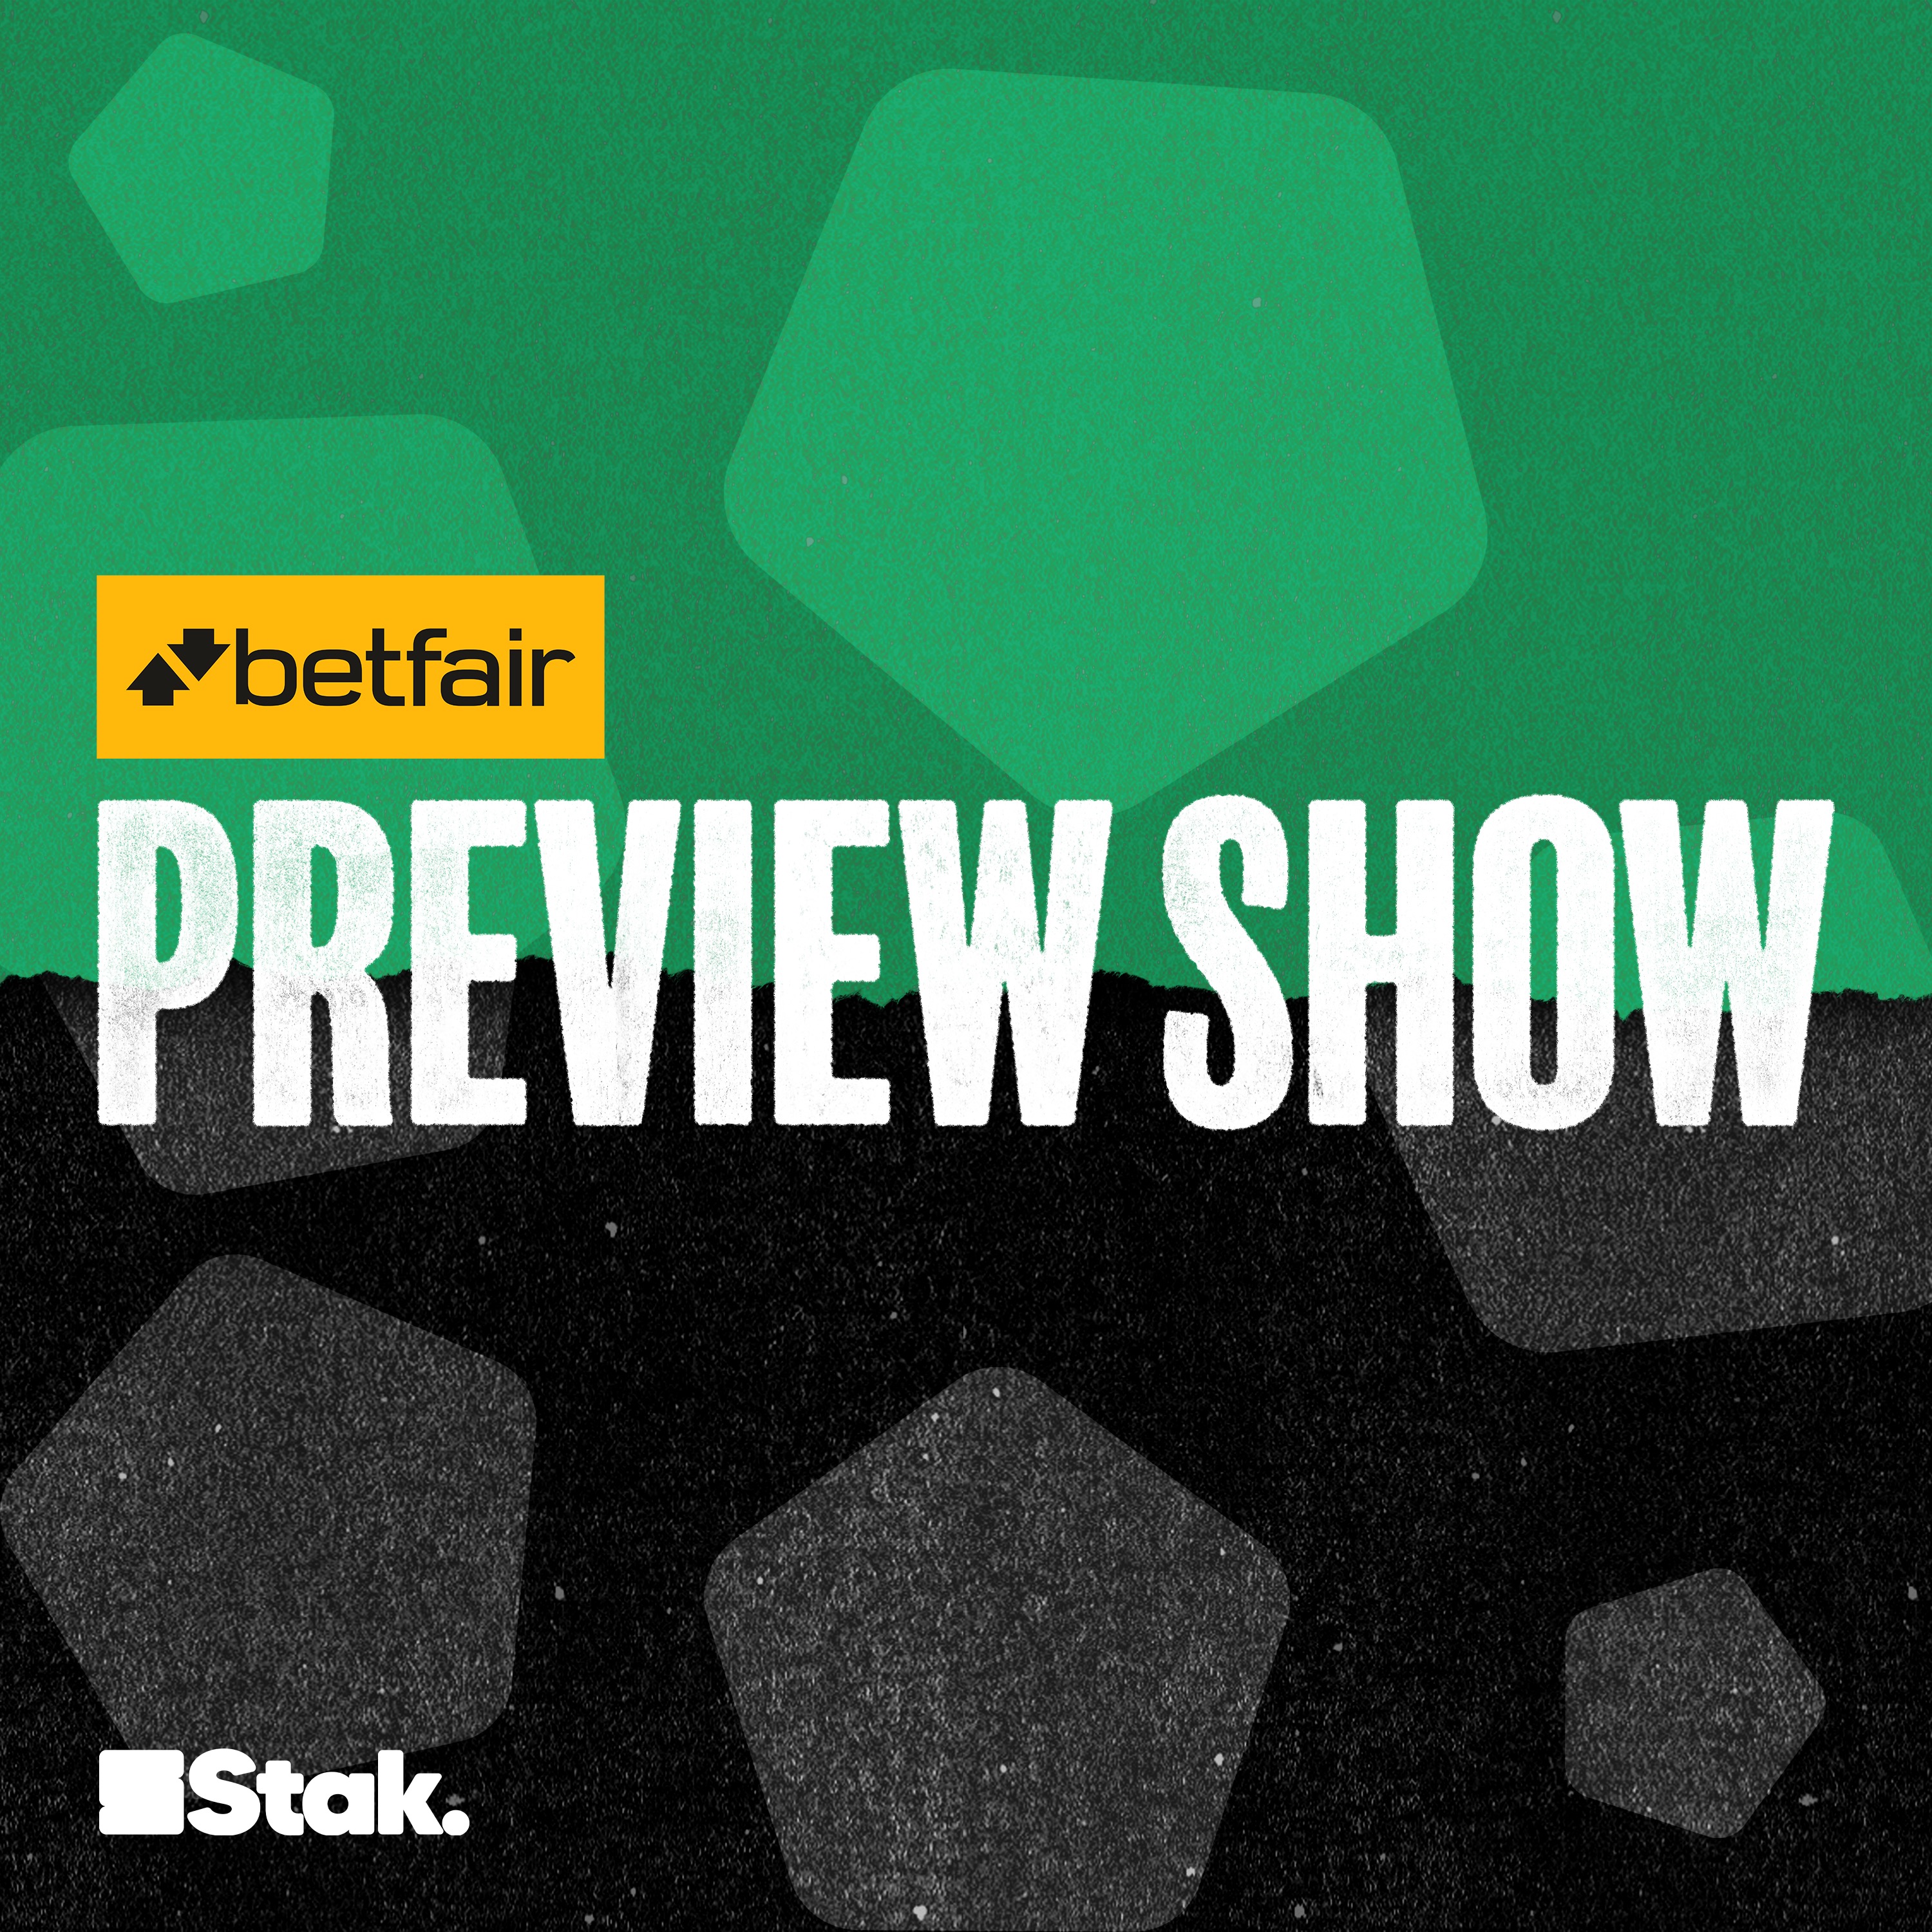 The Preview Show: Thrashing around in their own muck